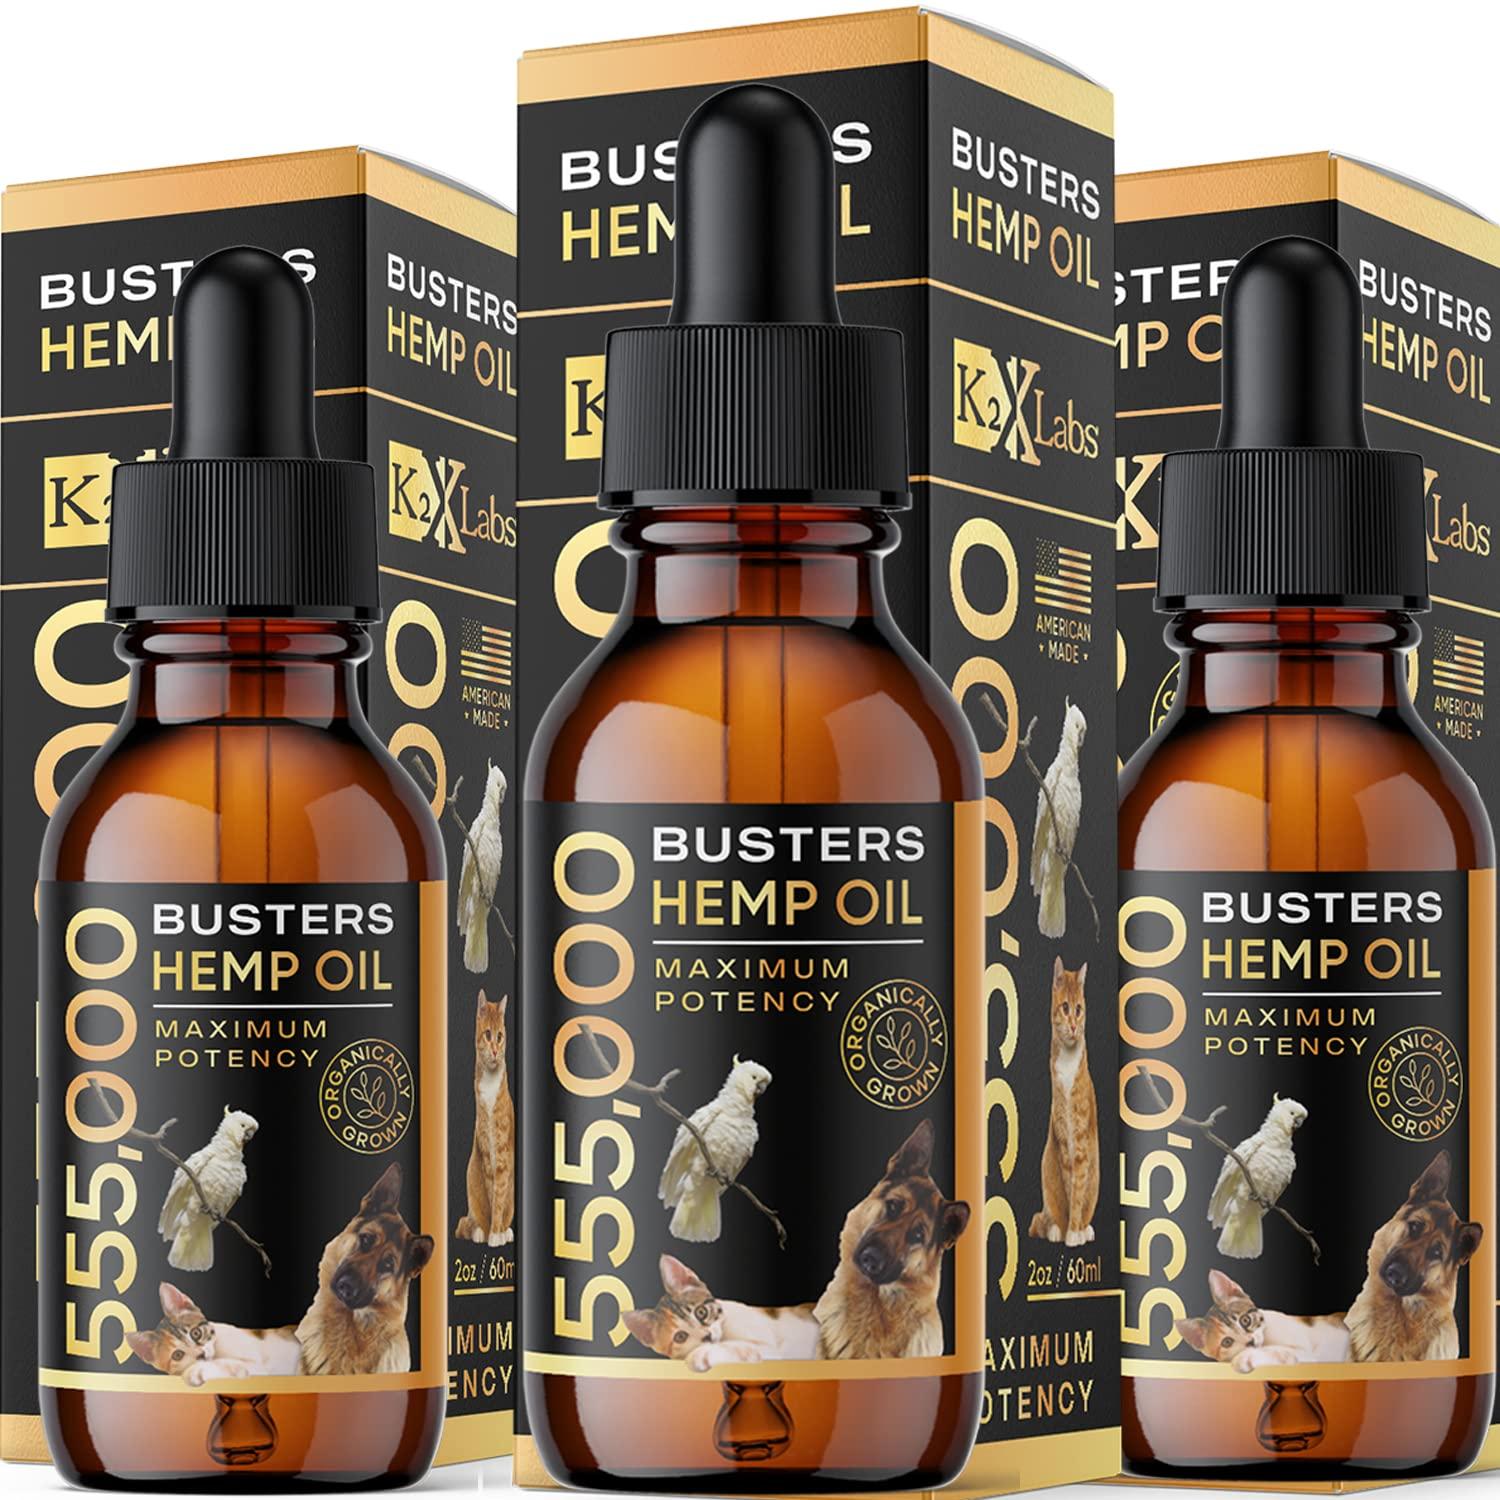 K2xLabs Buster's Organic Hemp Oil for Dogs and Pets, 555,000 Max Potency, Large 60ml Bottle, Made in USA - Miracle Formula, Perfectly Balanced Omega 3, 6, 9 - Relief for Joints, Calming (3Pack)